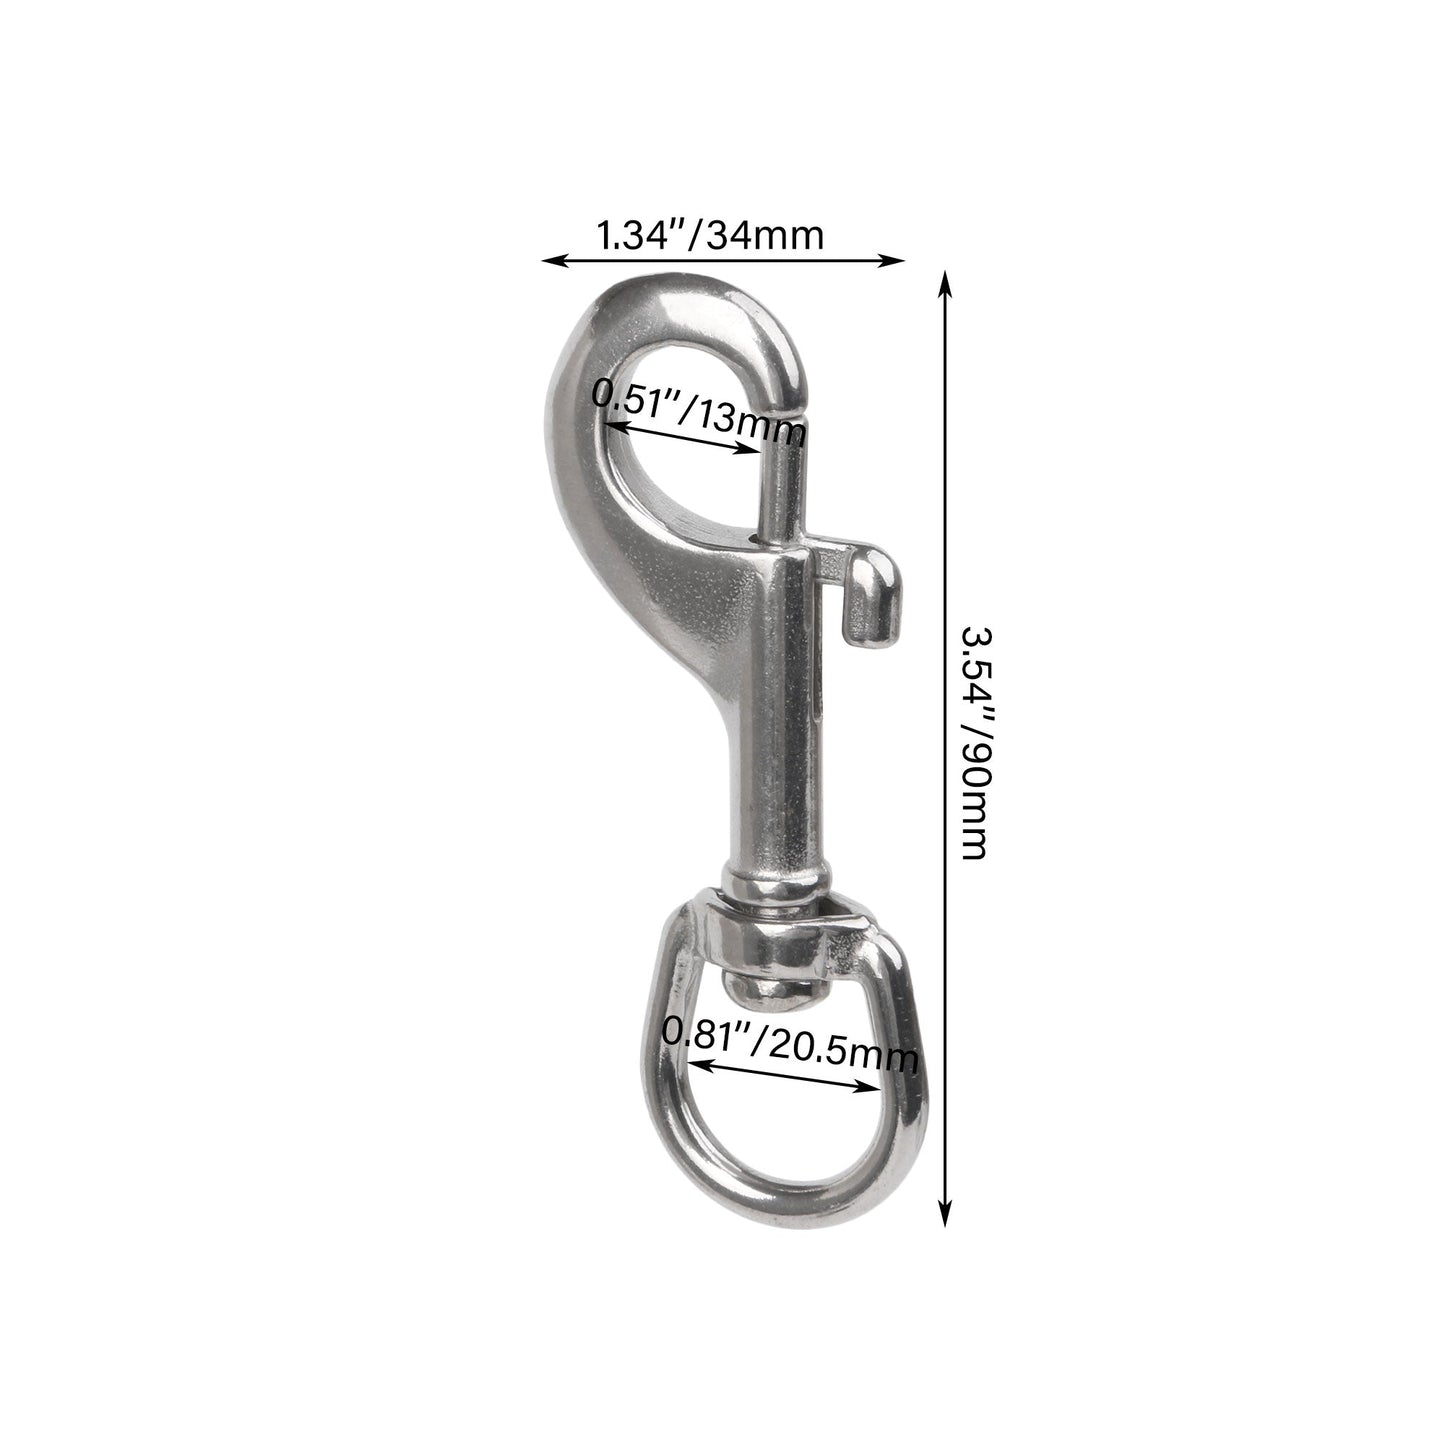 BQLZR Single Swivel Snaps Hooks 90mm Silver Stainless Steel for DIY Project Pack of 20